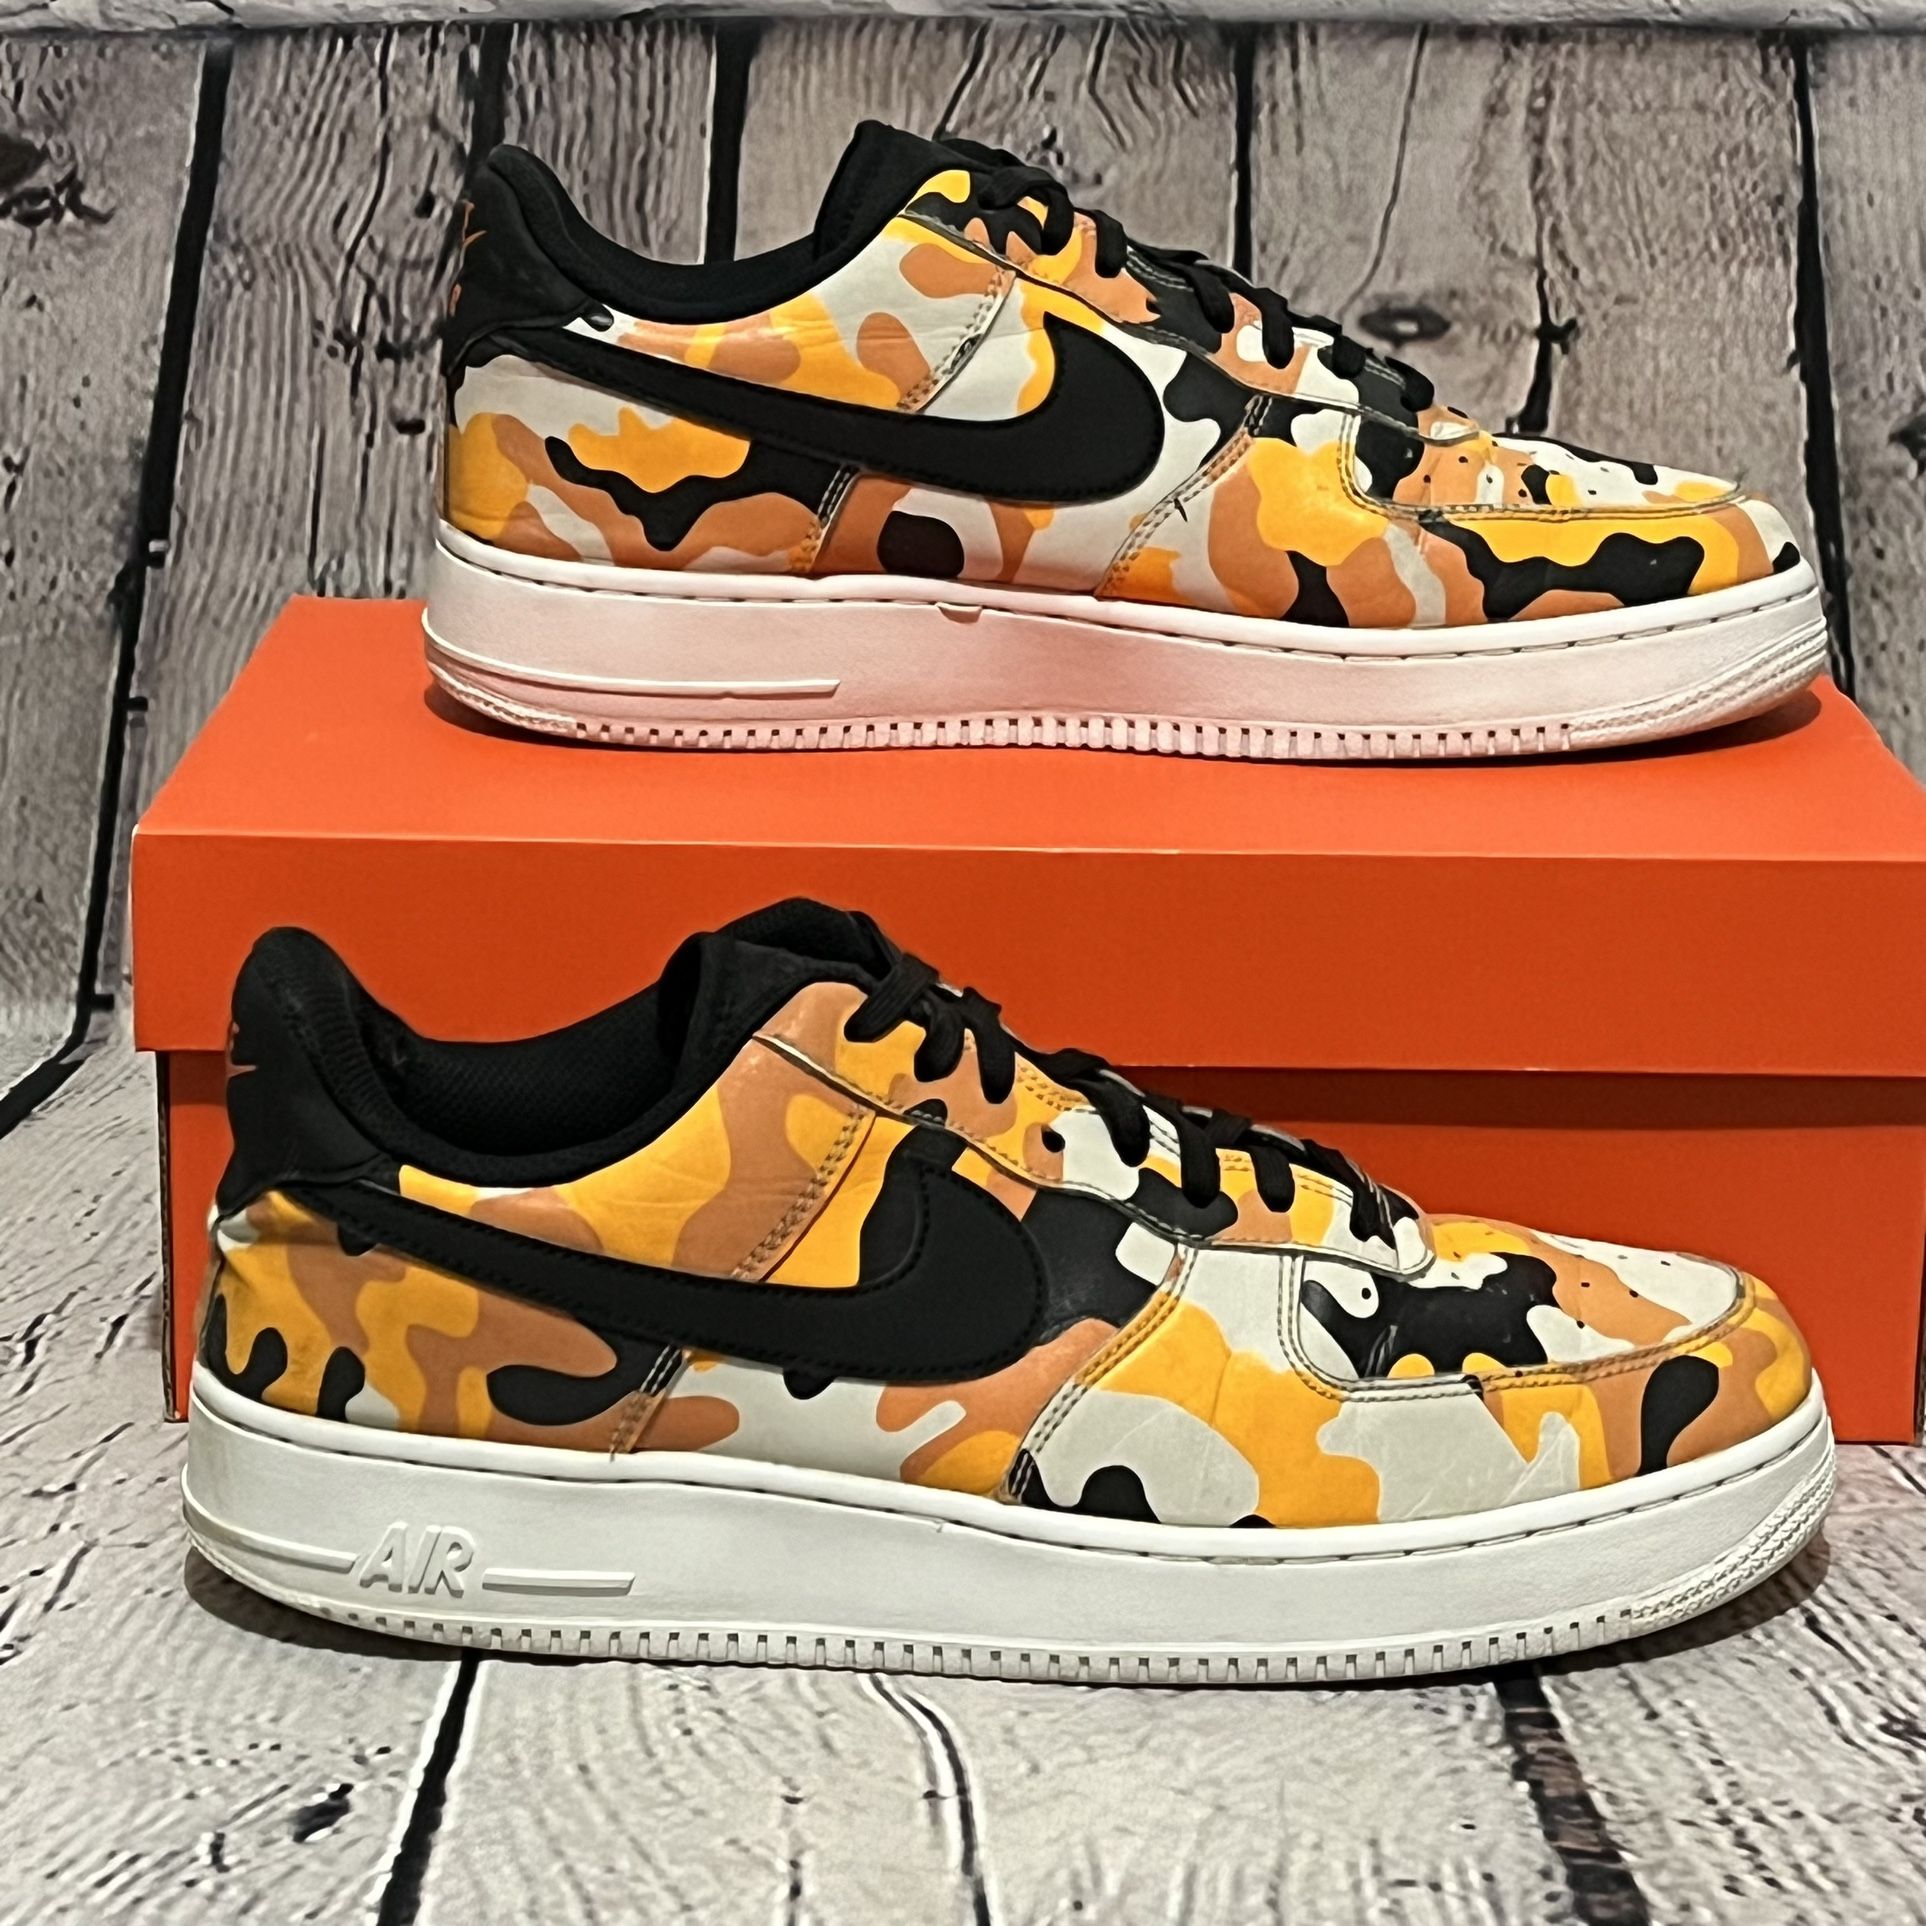 Nike Air Force 1 AF1 '07 LV8 “Orange Camo” Sneakers for Sale in